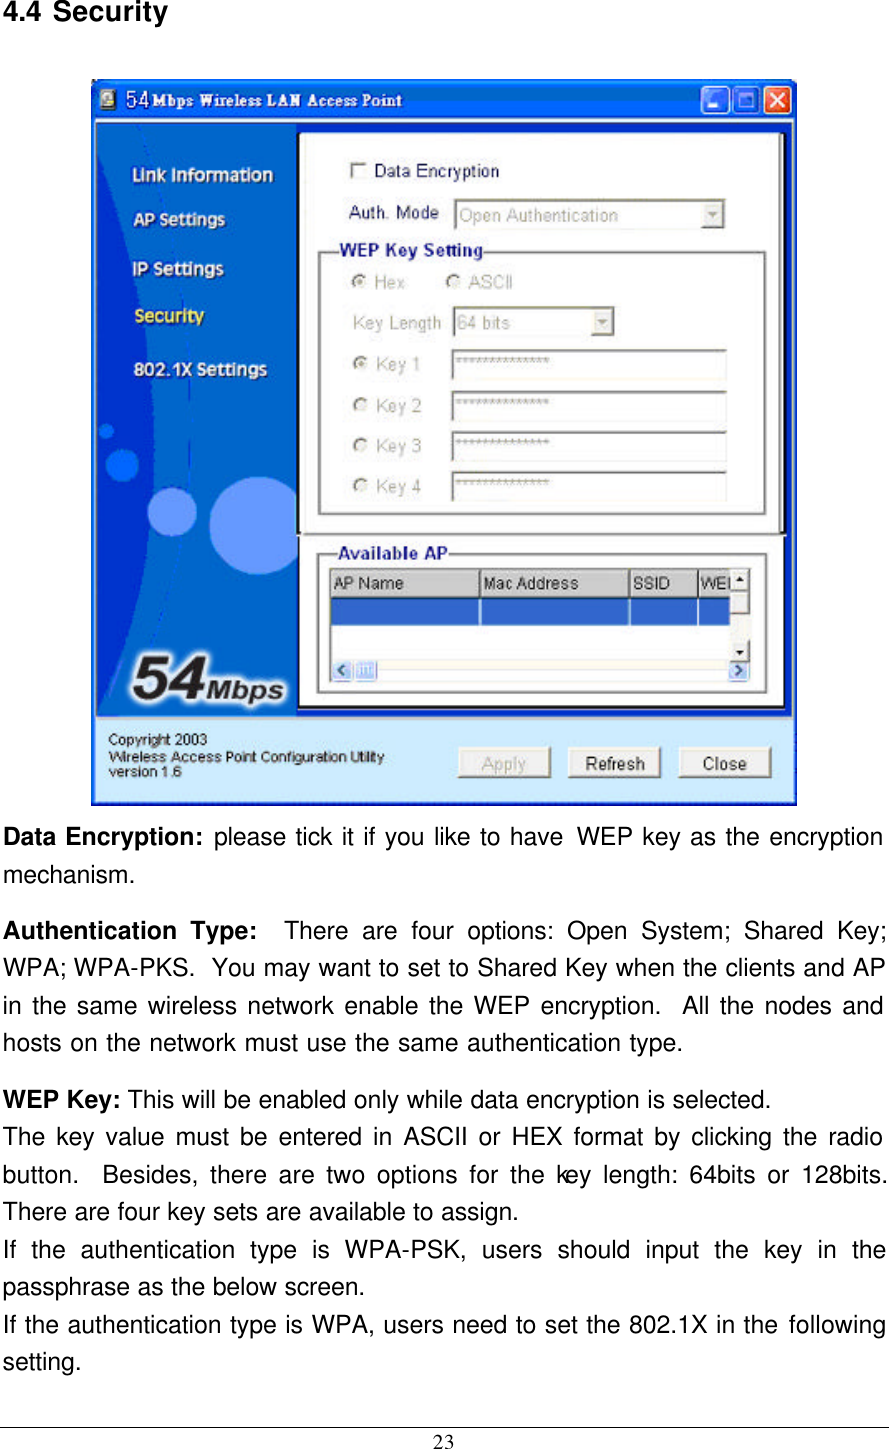 23 4.4 Security  Data Encryption: please tick it if you like to have WEP key as the encryption mechanism. Authentication Type:  There are four options: Open System; Shared Key; WPA; WPA-PKS.  You may want to set to Shared Key when the clients and AP in the same wireless network enable the WEP encryption.  All the nodes and hosts on the network must use the same authentication type.   WEP Key: This will be enabled only while data encryption is selected. The key value must be entered in ASCII or HEX format by clicking the radio button.  Besides, there are two options for the key length: 64bits or 128bits.  There are four key sets are available to assign. If the authentication type is WPA-PSK, users should input the key in the passphrase as the below screen. If the authentication type is WPA, users need to set the 802.1X in the following setting. 